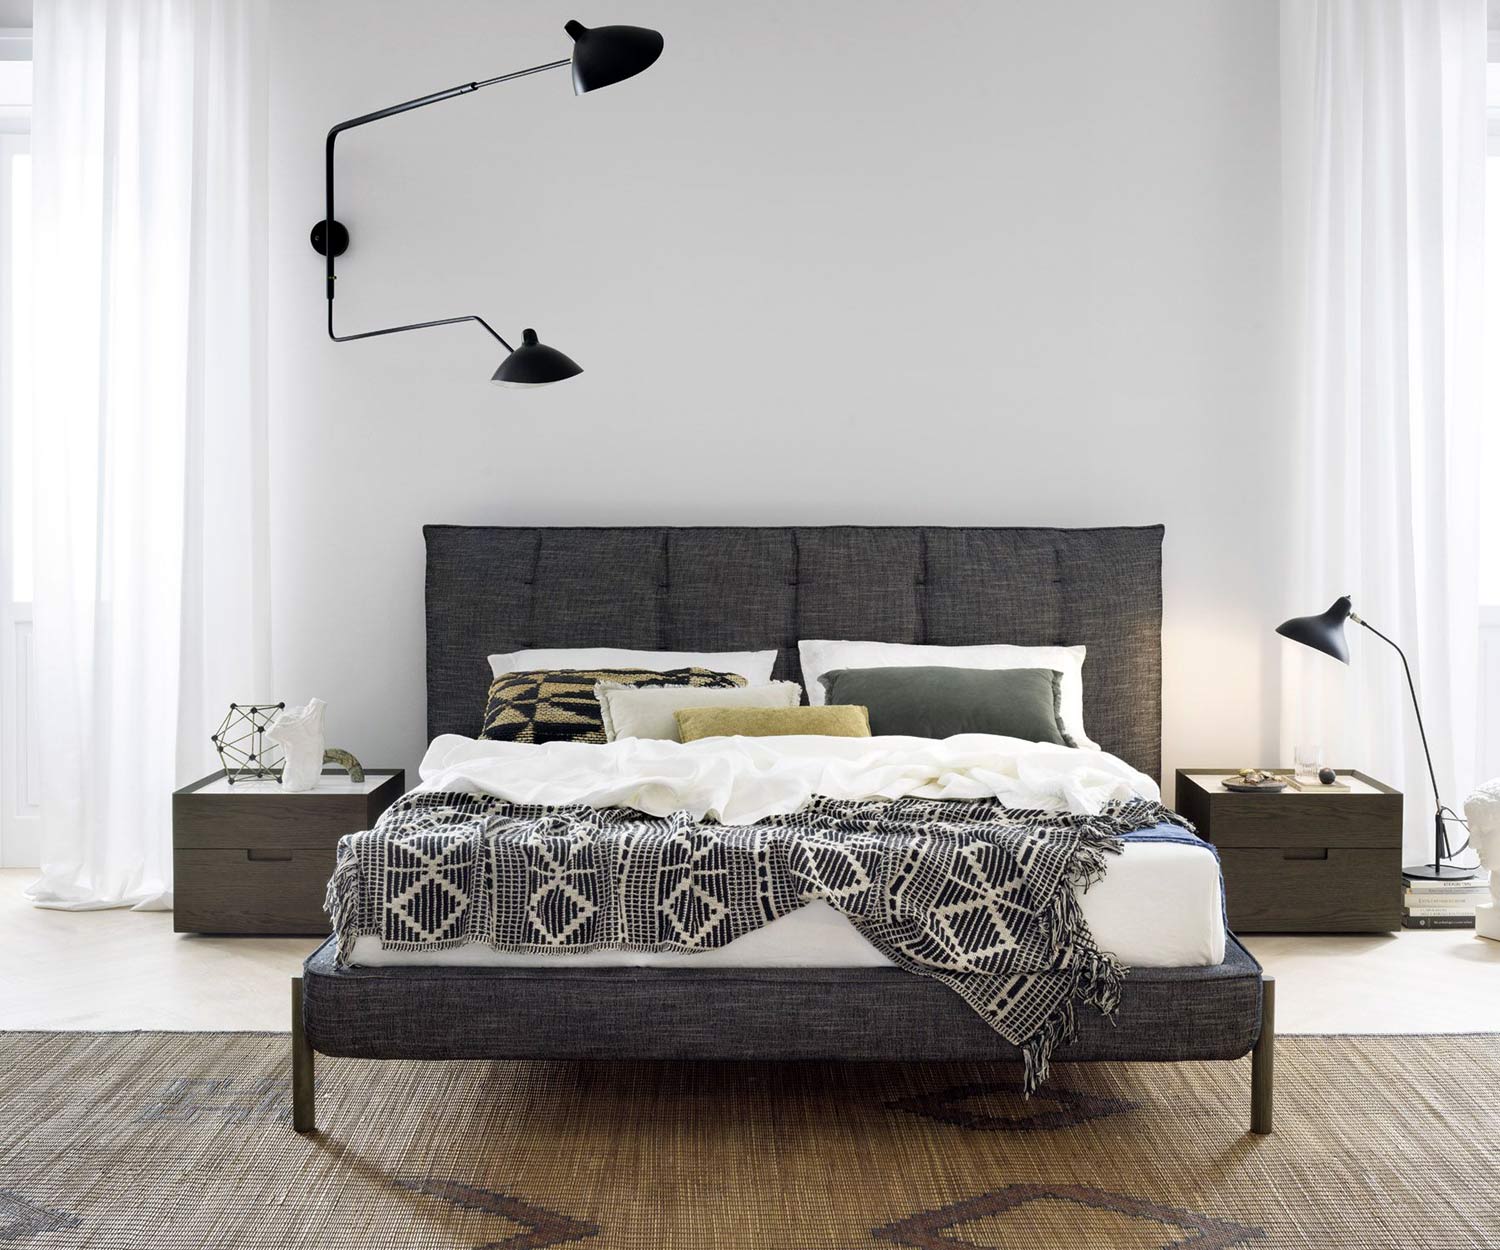 Exclusive Novamobili Design tufted bed in the bedroom